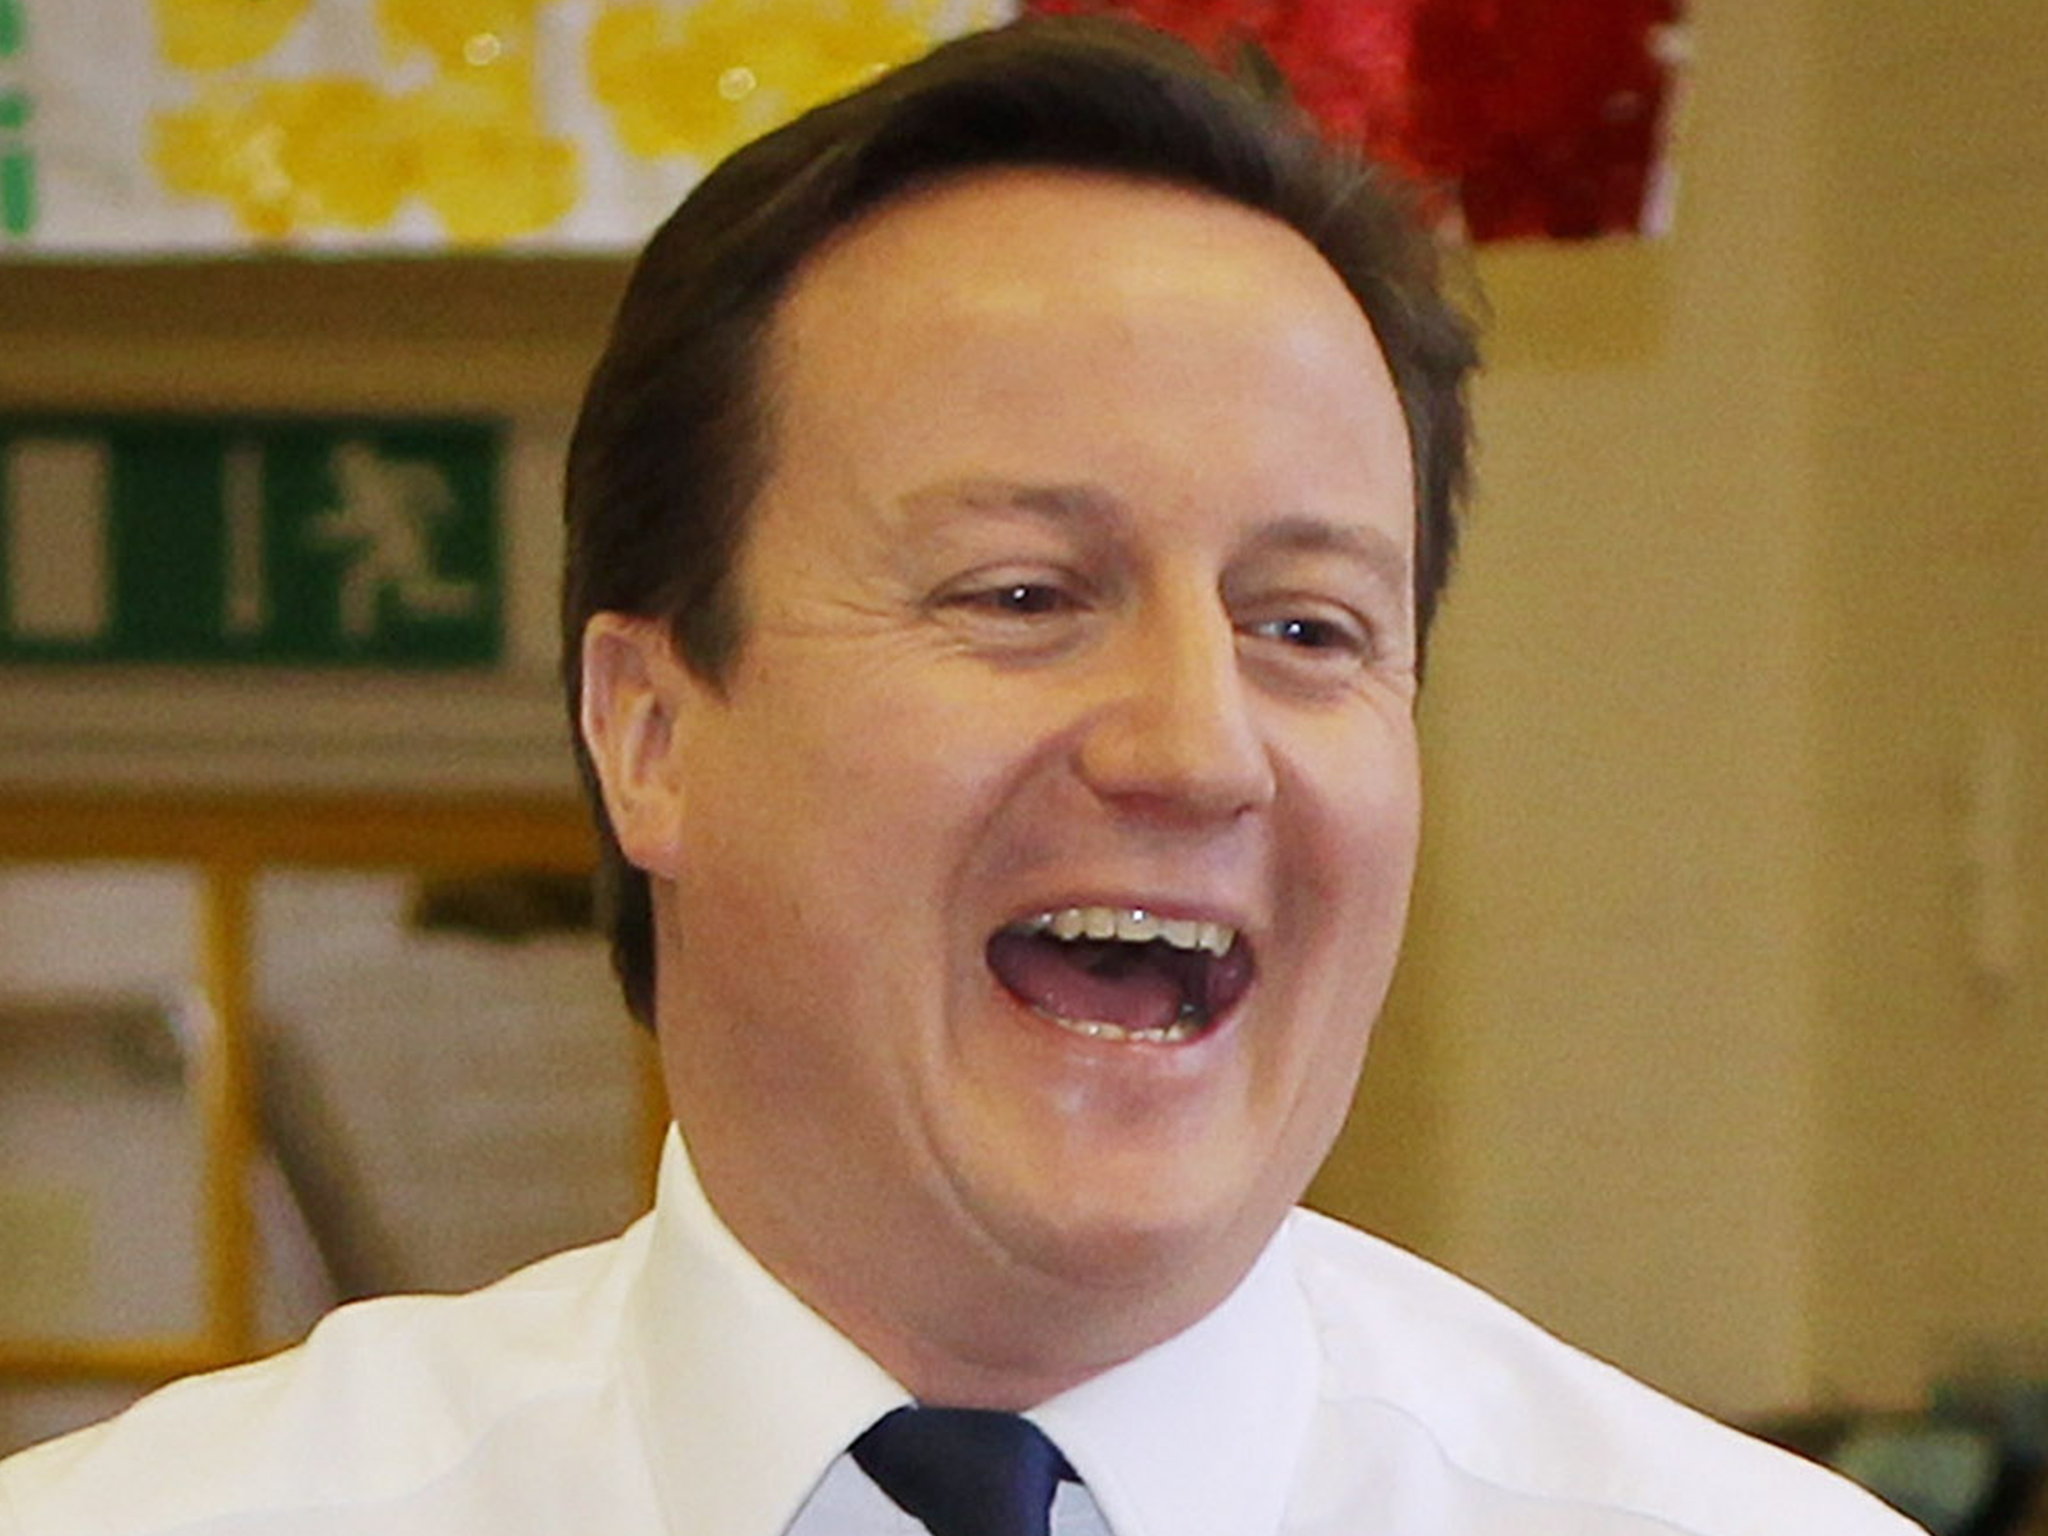 David Cameron laughs while maintaining his usual sexy demeanour